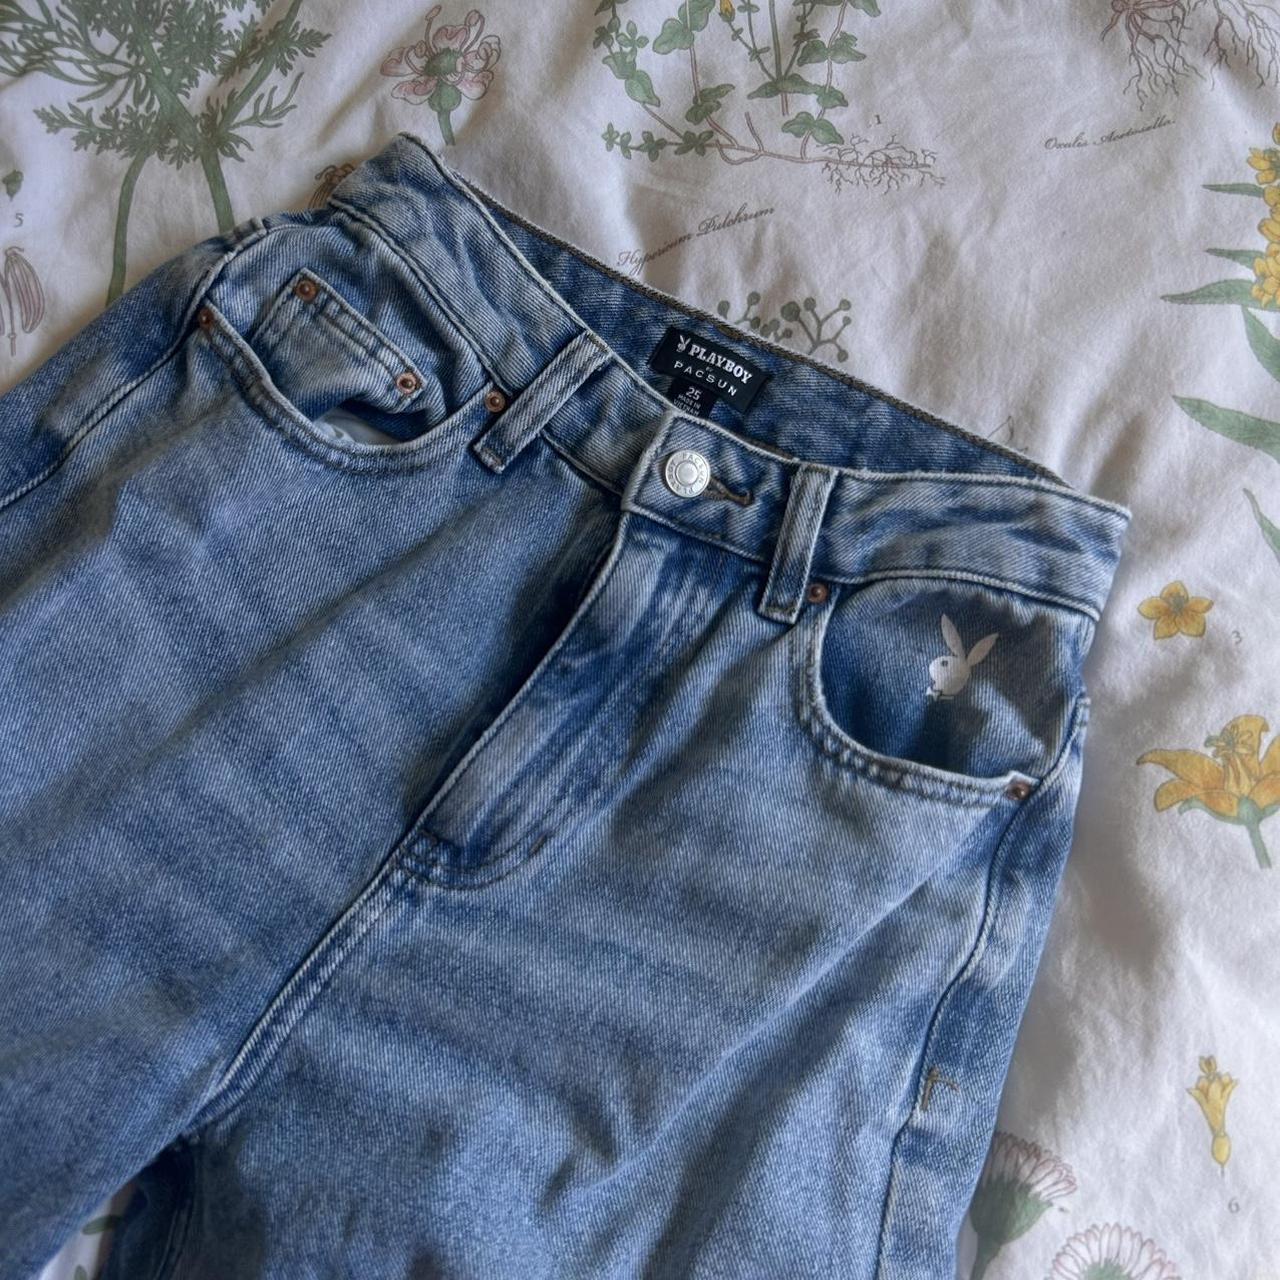 Playboy Women's Pink and Blue Jeans | Depop